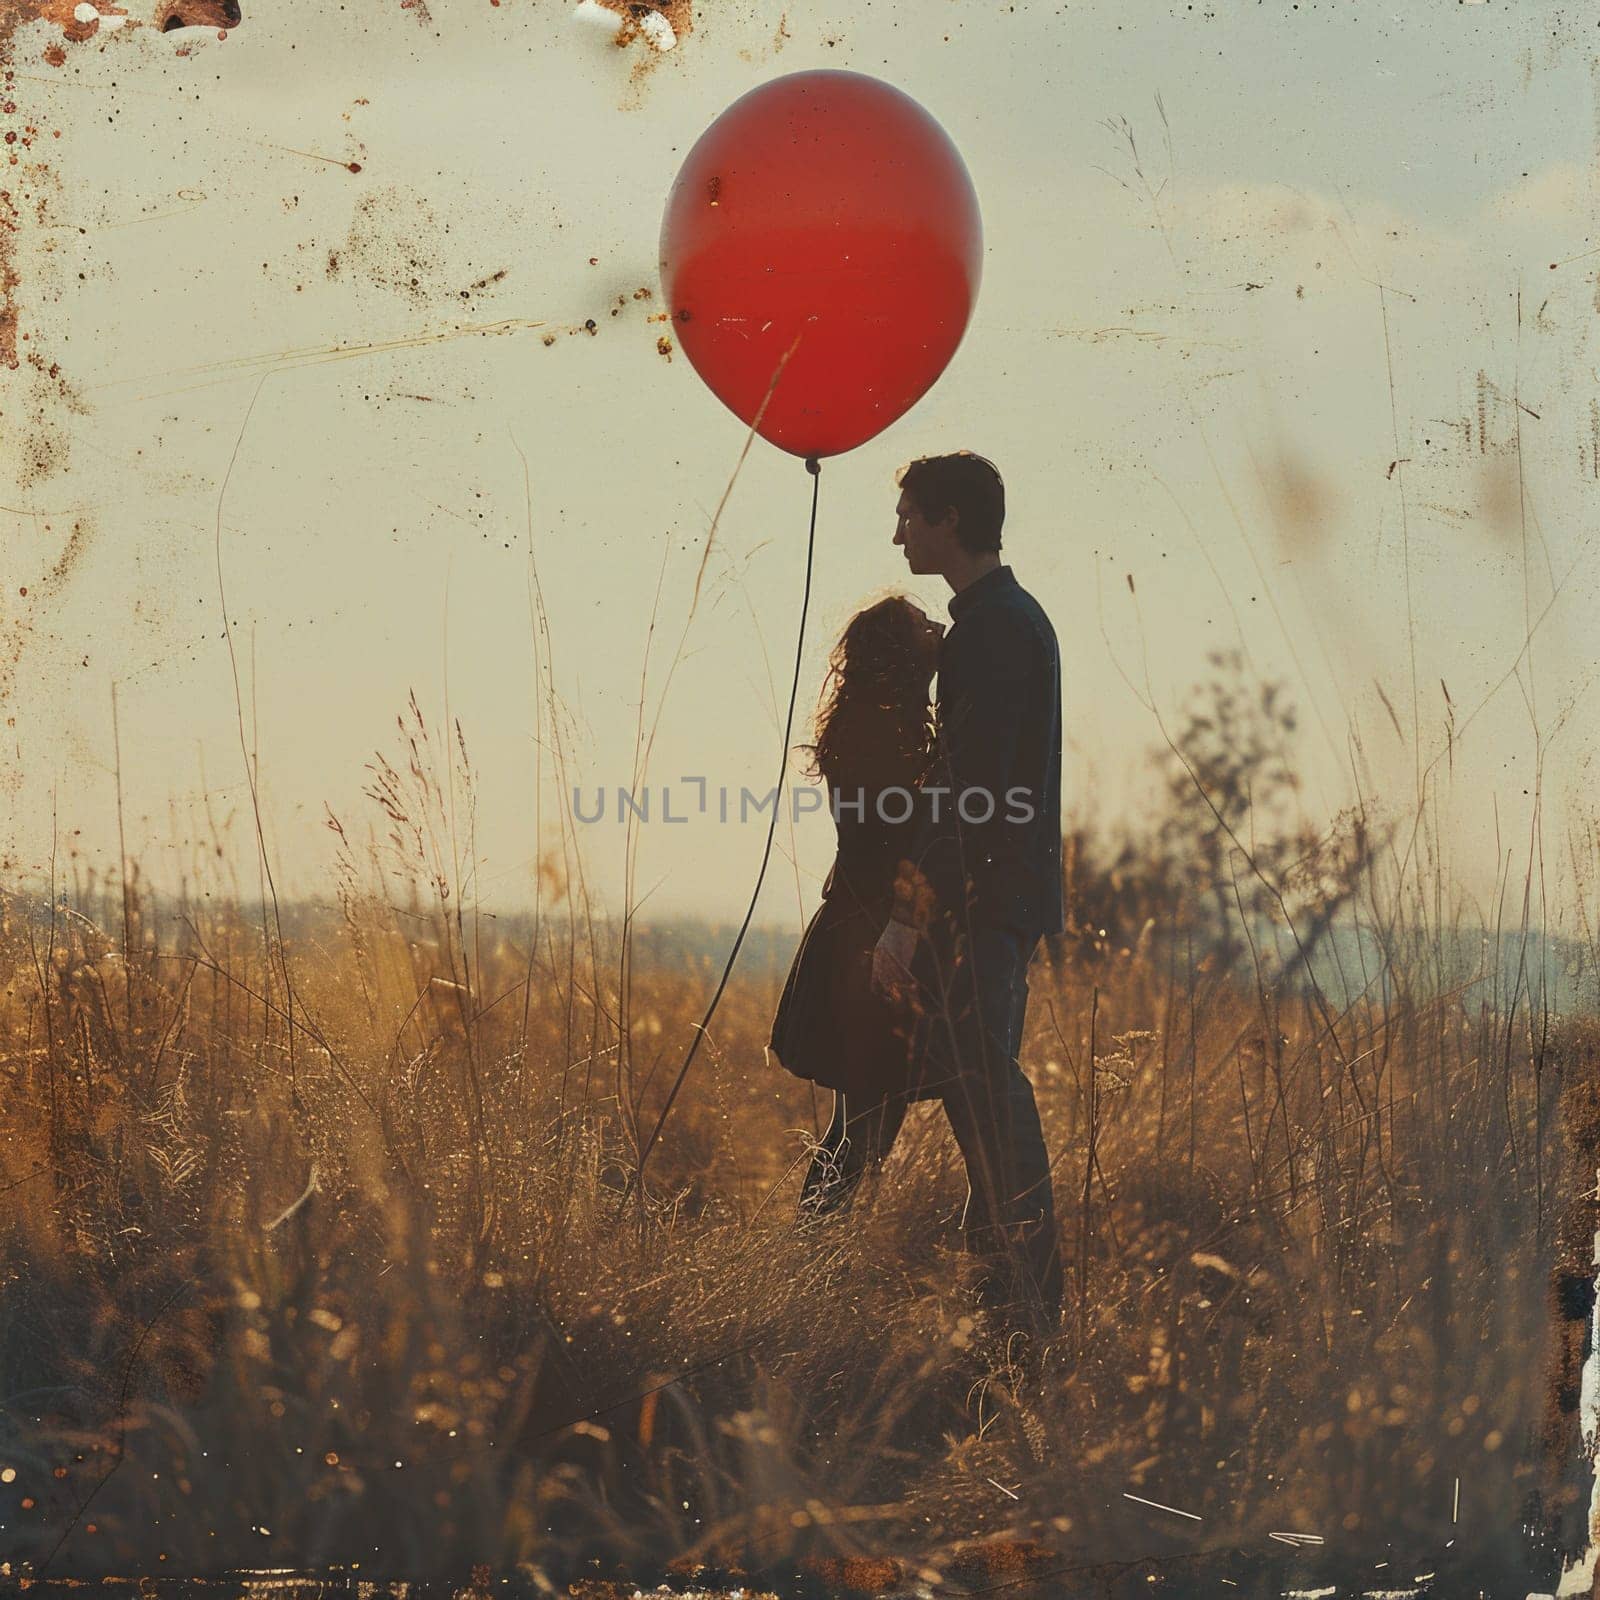 Man and Woman Holding Red Balloon by but_photo